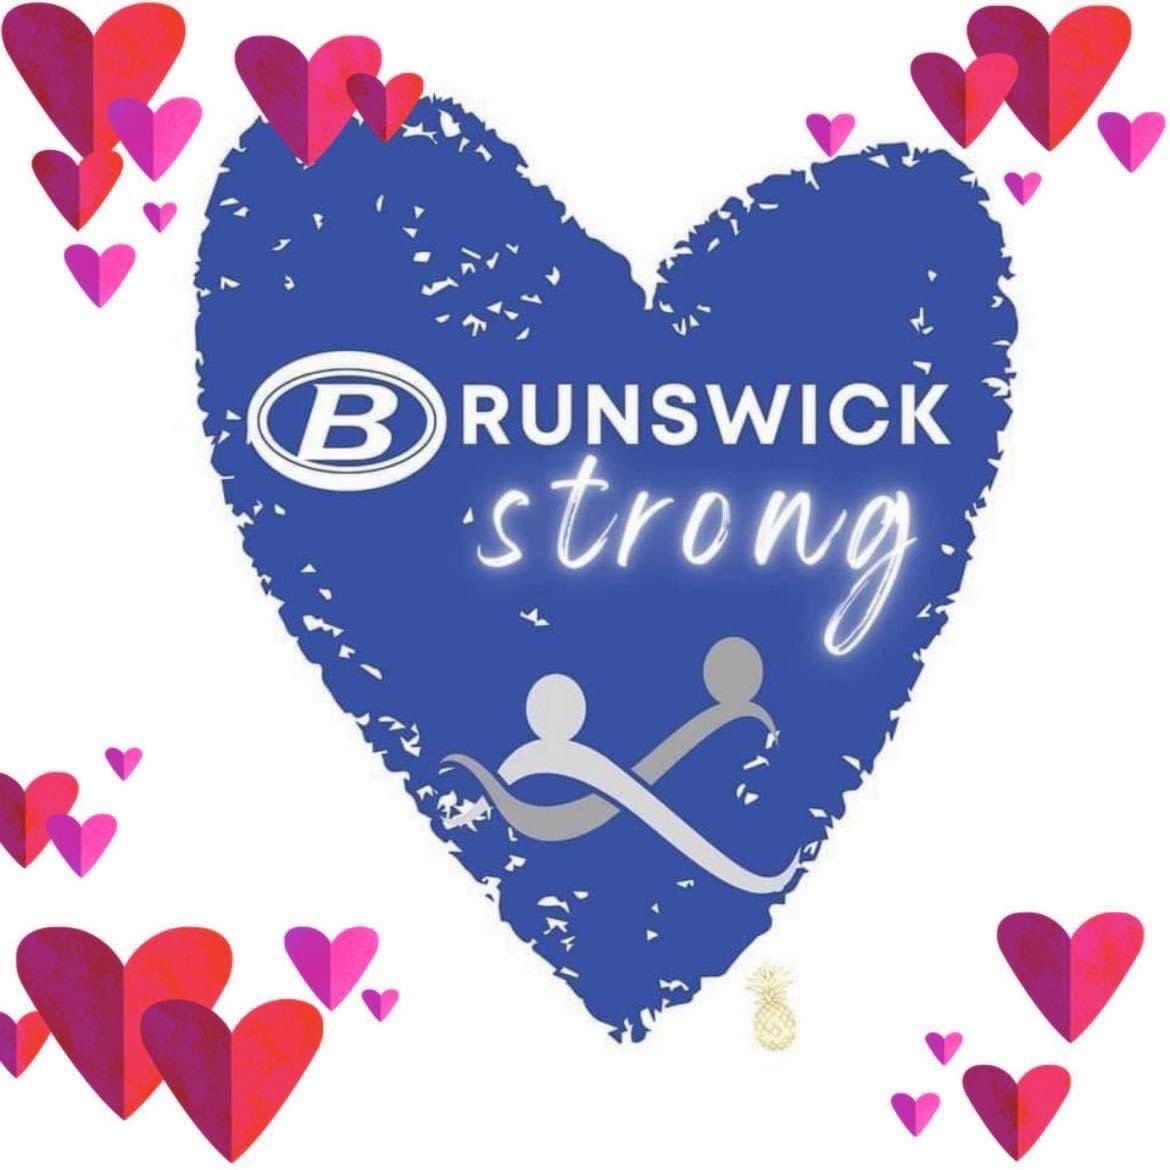 To every single BMS student who walks through our doors every morning: You are loved, you are cared for, you are enough. We are here for you and we grieve with you. Reach out to your principal or counselor if you need us. We love every single one of you. #BrunswickStrong